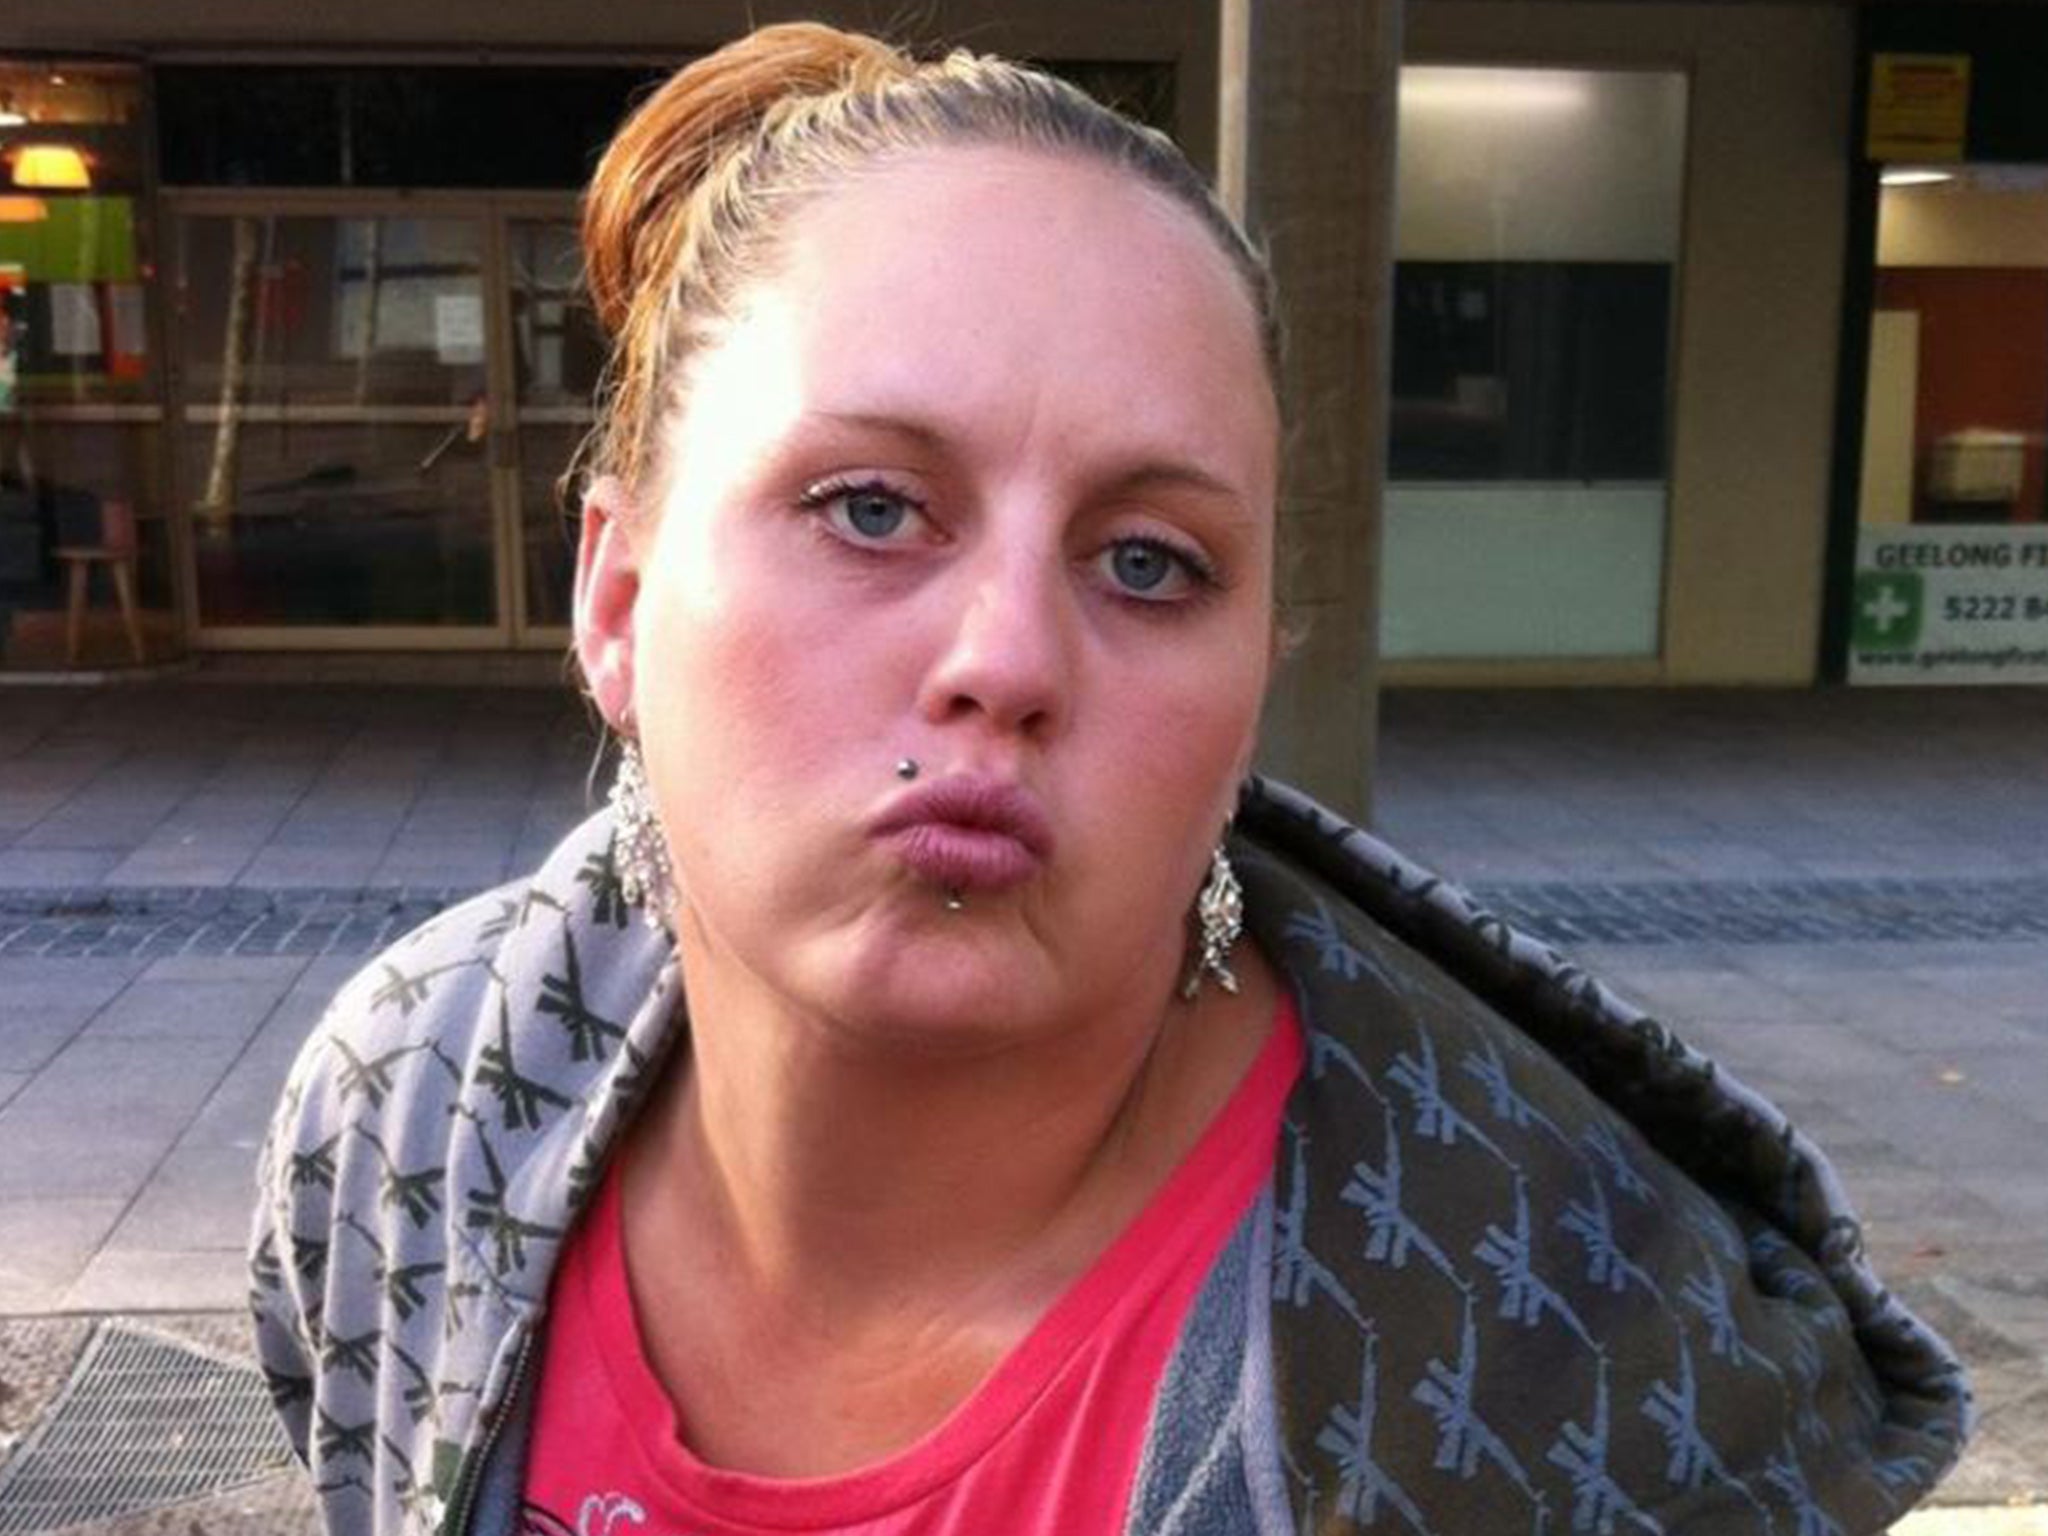 Kelly Webb, pictured, has been to prison 11 times in Australia for offences including the fatal stabbing of her stepfather in 2002